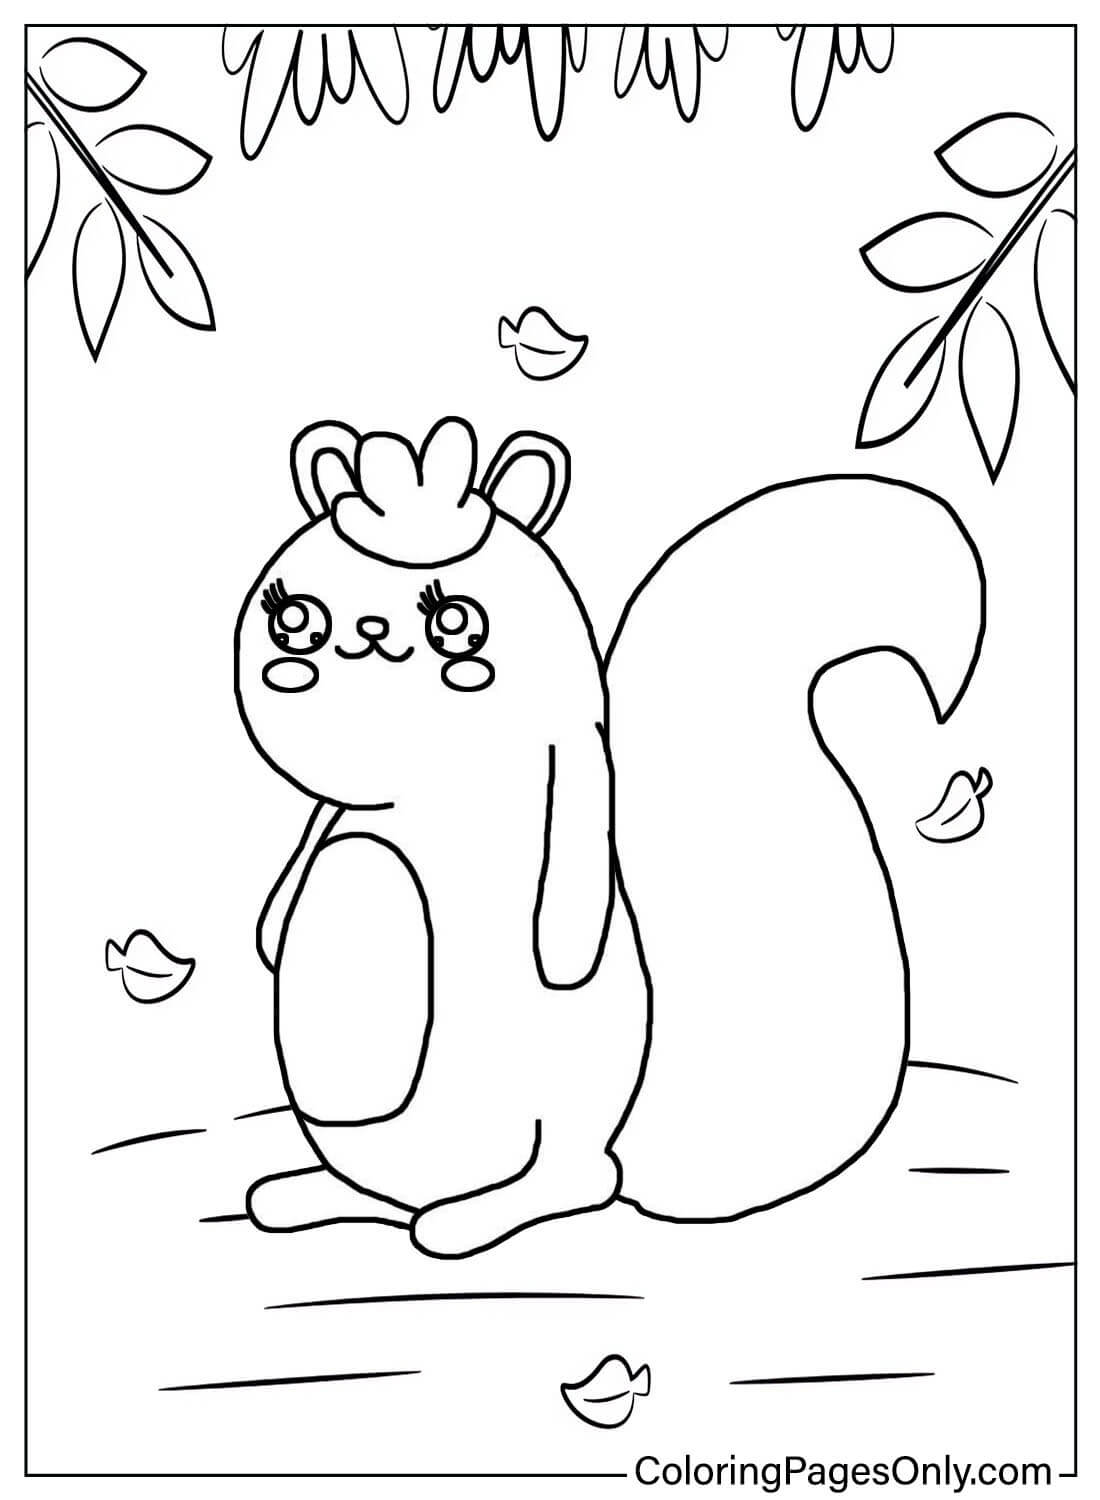 Coloring Page Chipmunk Free Coloring Page